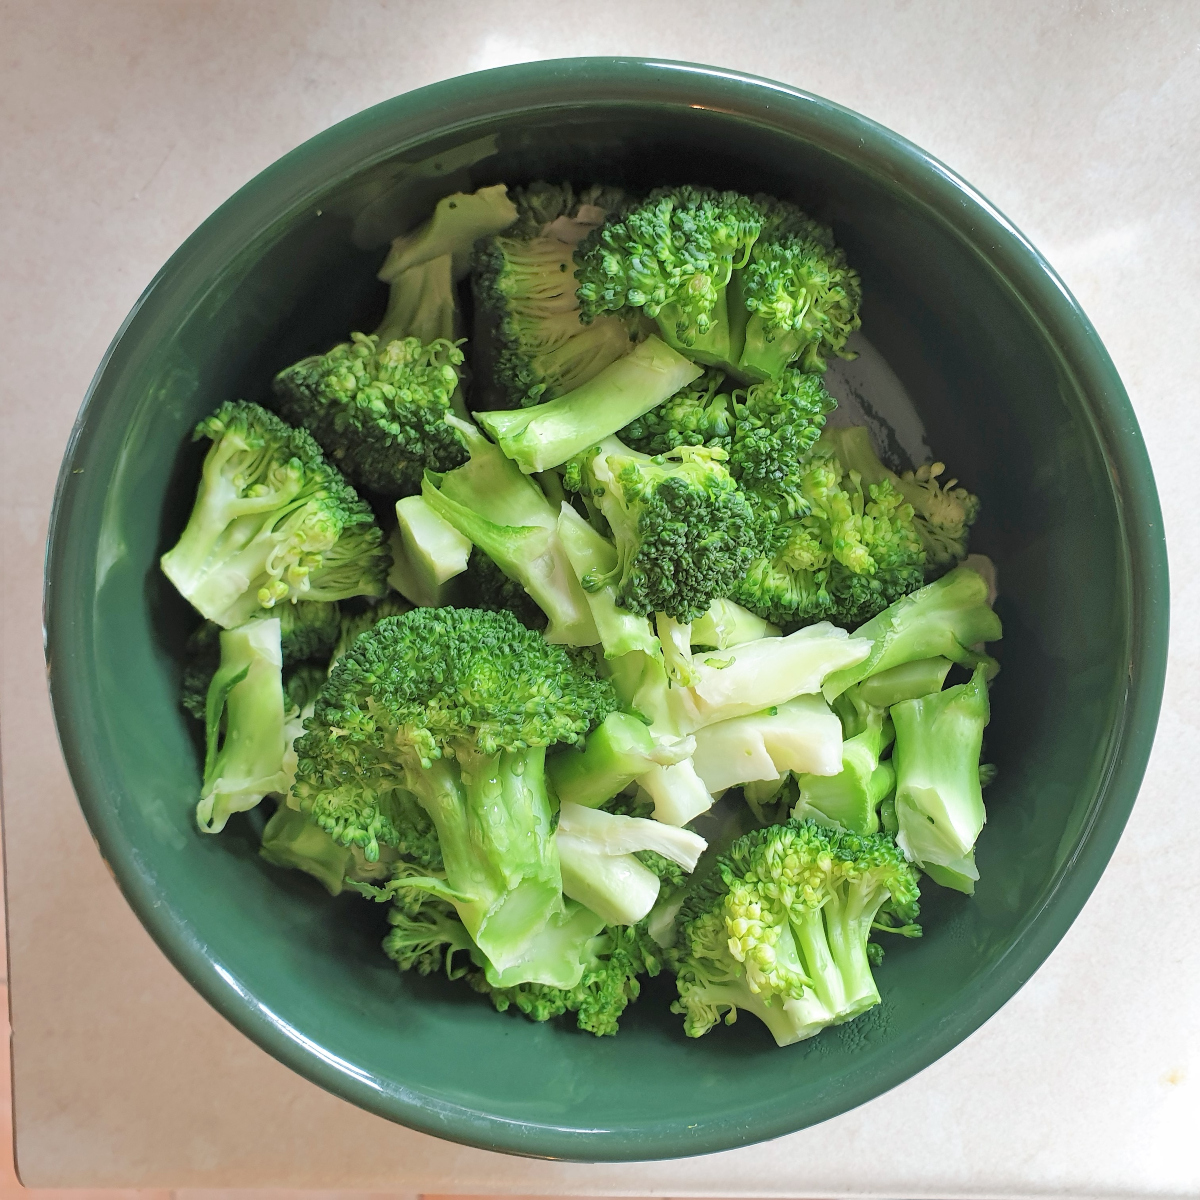 A dish of cooked broccoli florets.